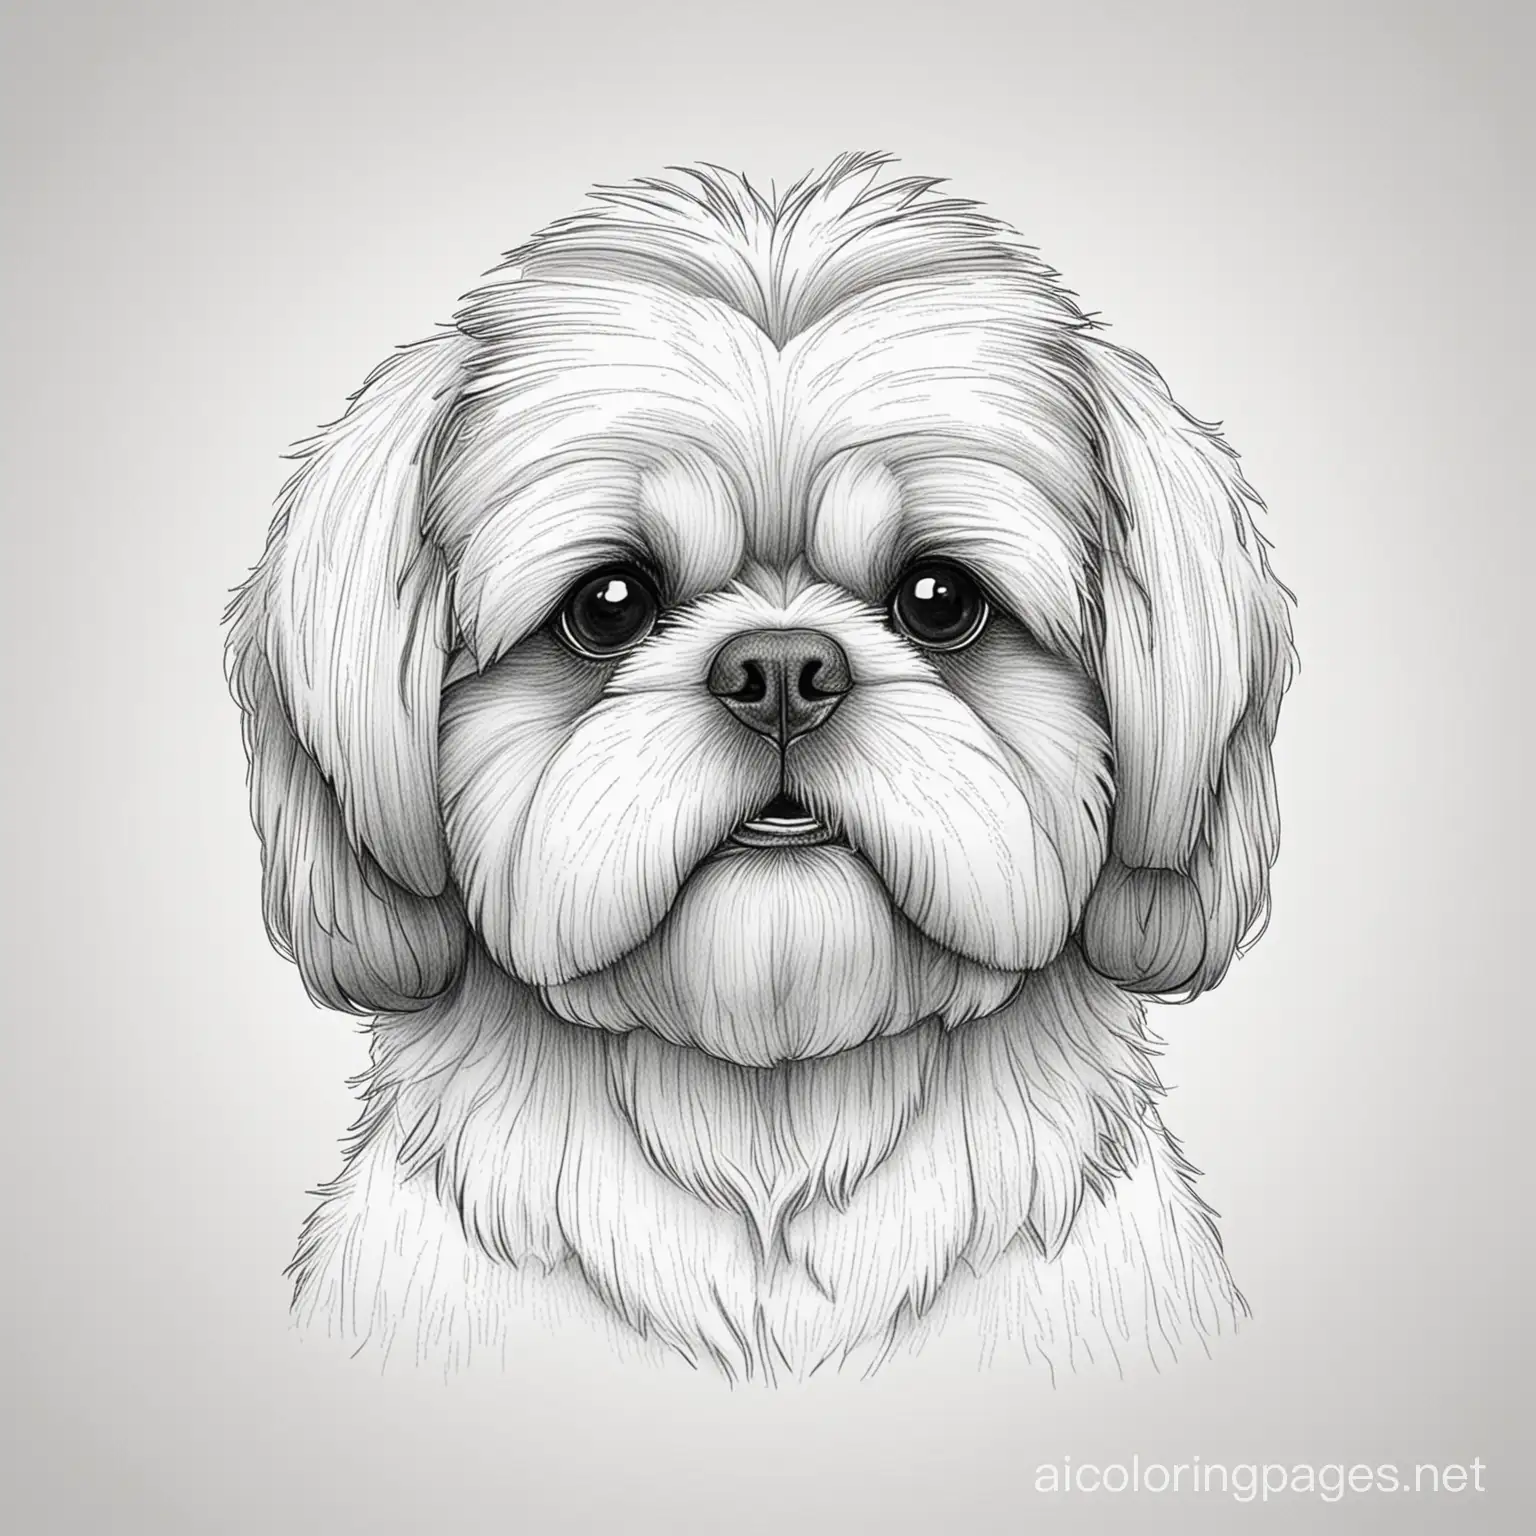 shih tzu mugshot, Coloring Page, black and white, line art, white background, Simplicity, Ample White Space. The background of the coloring page is plain white to make it easy for young children to color within the lines. The outlines of all the subjects are easy to distinguish, making it simple for kids to color without too much difficulty